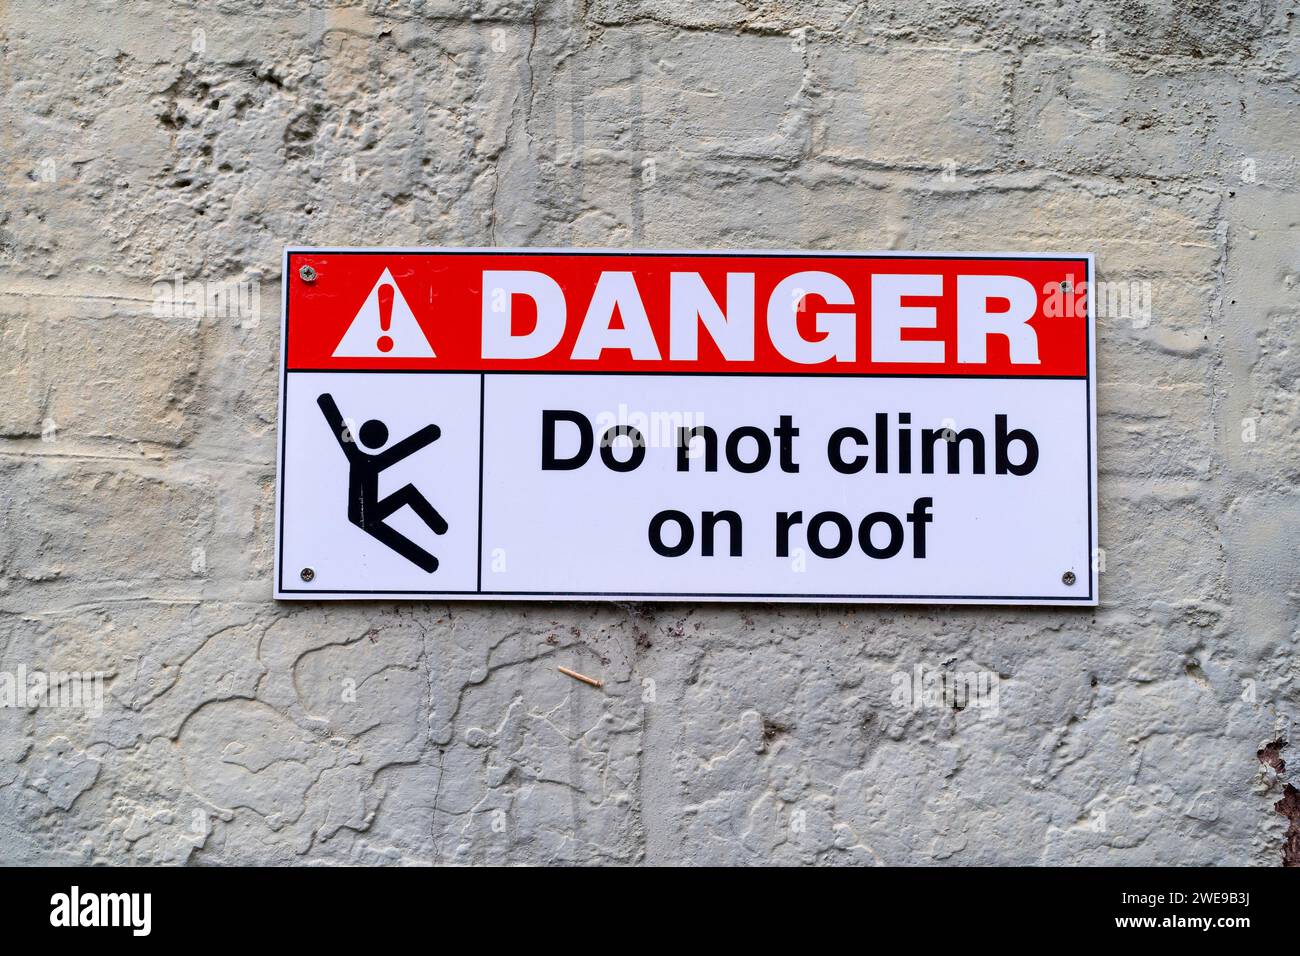 Close up of warning notice in situ on outdoor wall advising public: 'Danger Do Not Climb on Roof' with illustration of falling figure on sign. Stock Photo